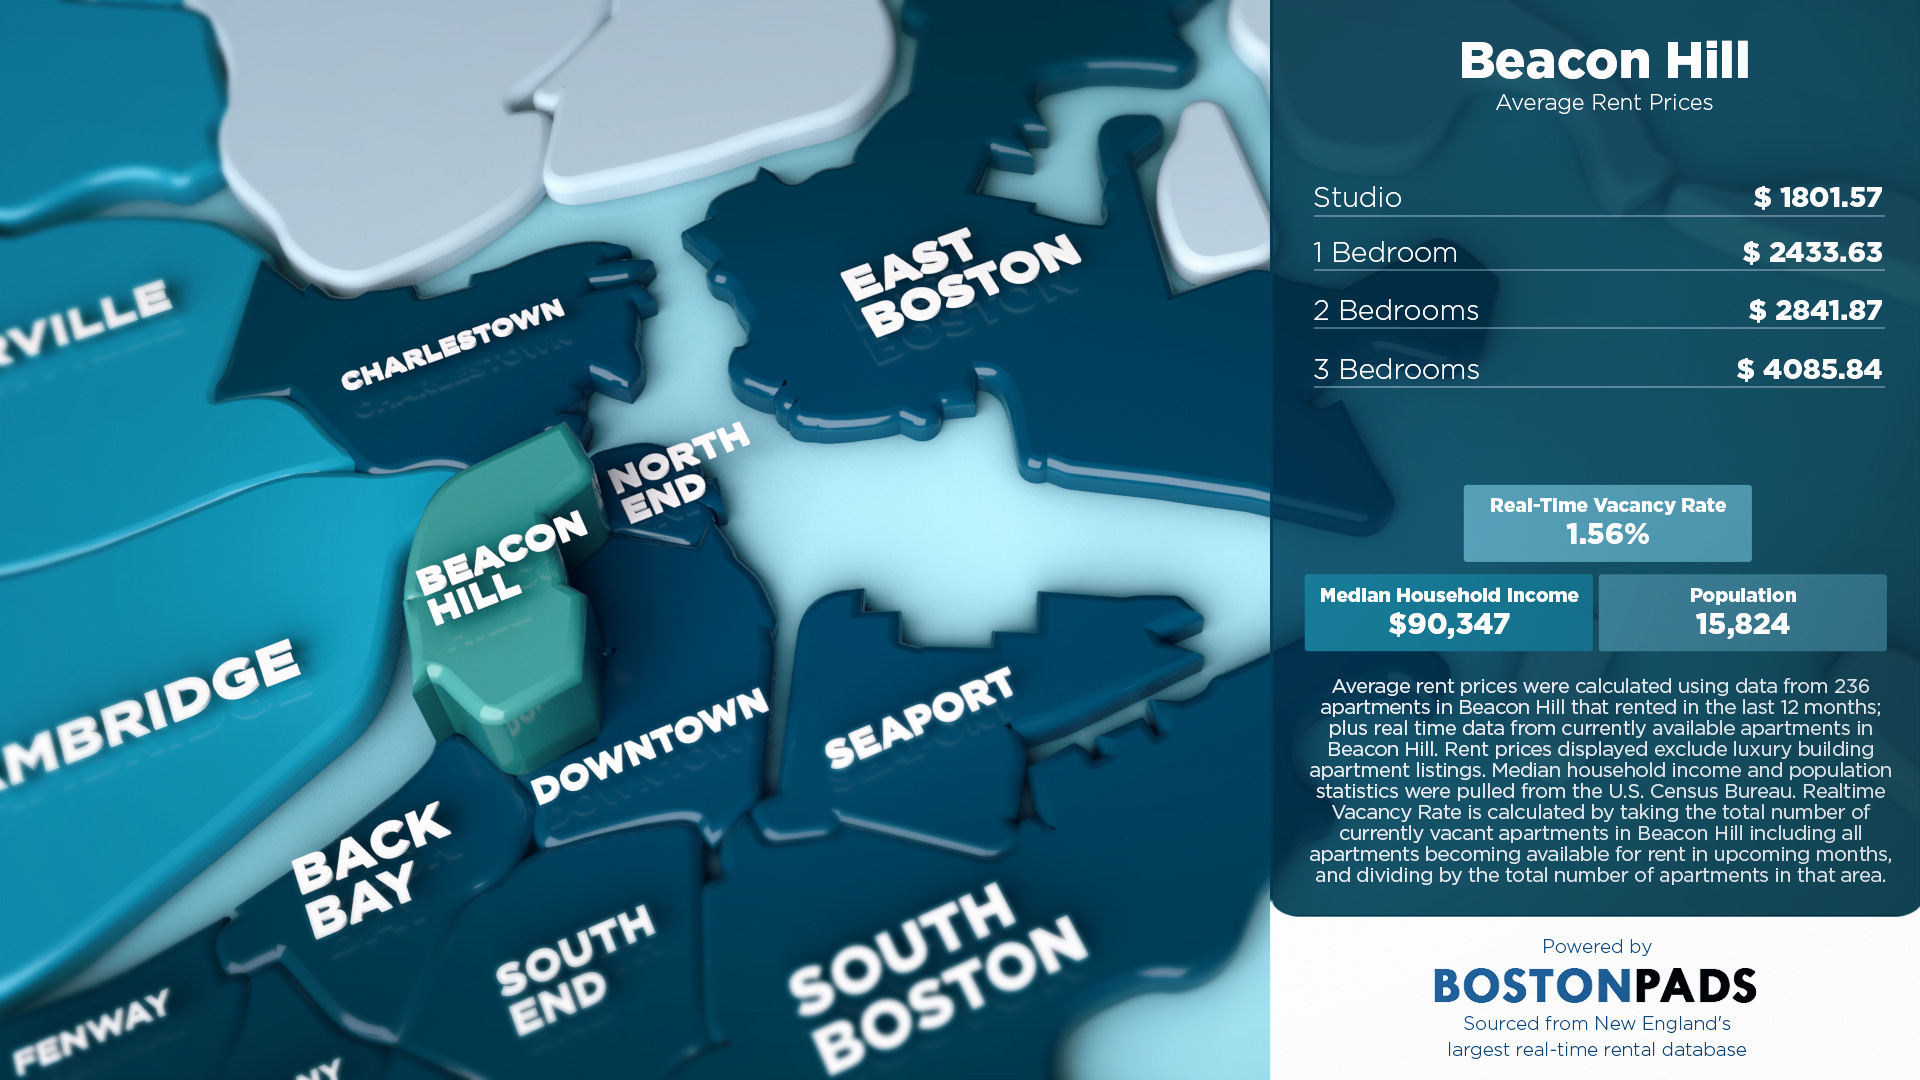 Average Rent Prices in Beacon Hill